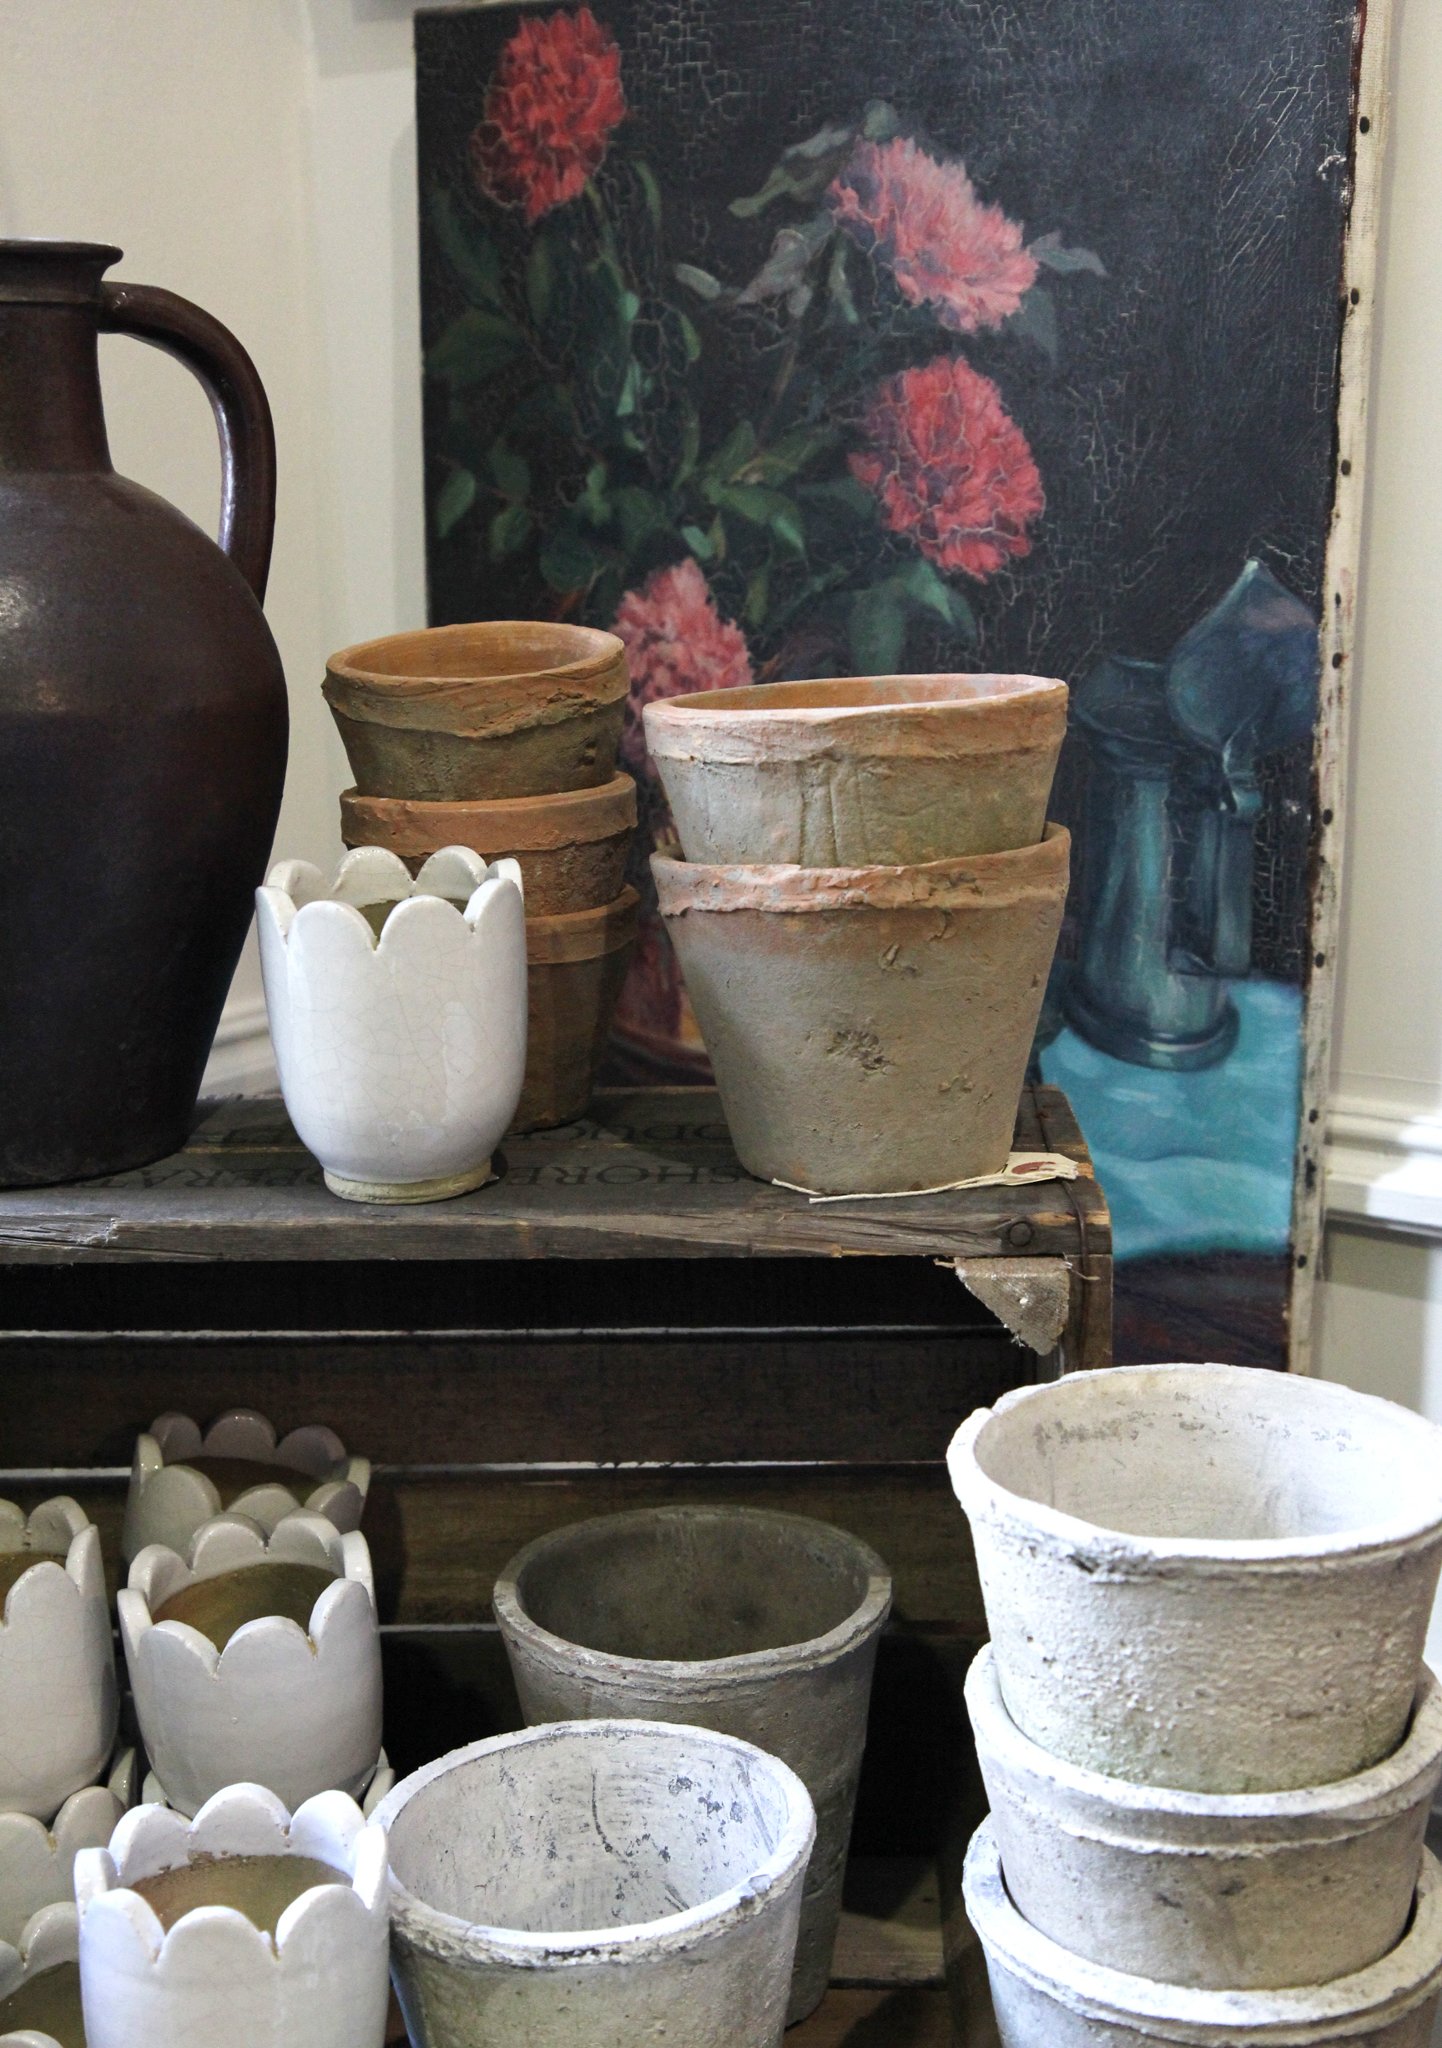 Oil painting and vintage plant pots inside vintage interiors store Domestic Science